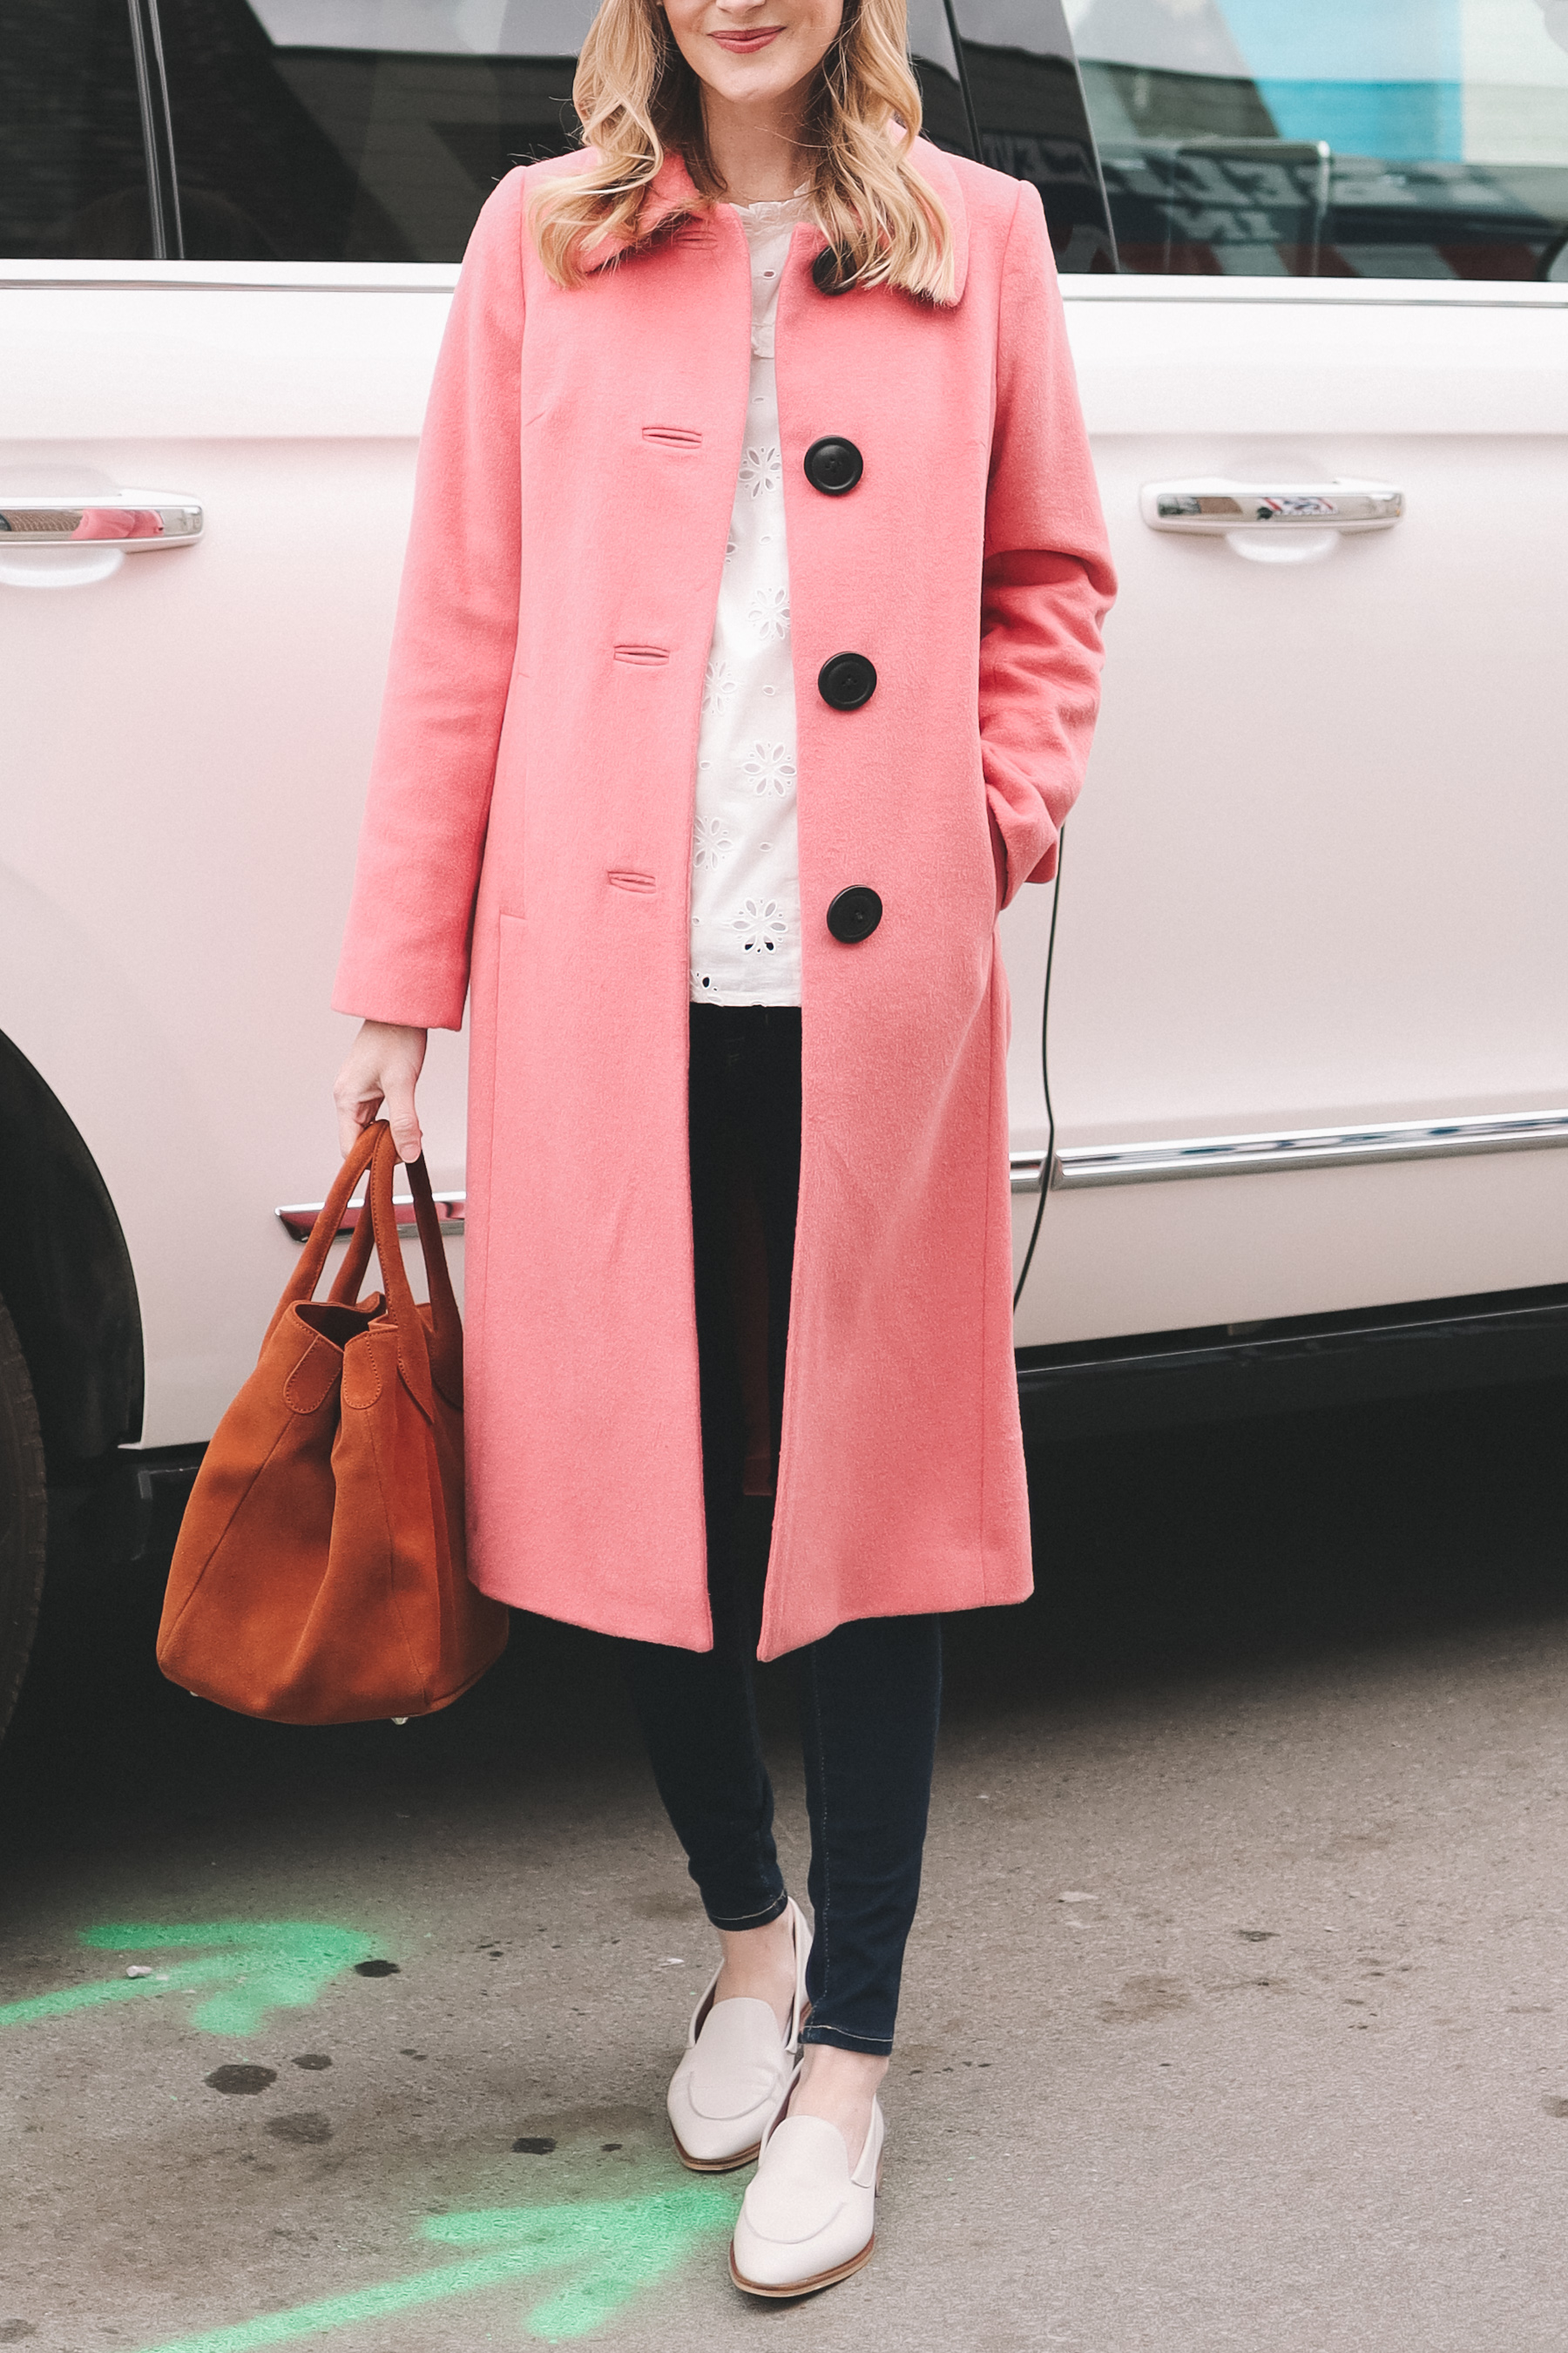 Kelly Larkin is featuring the Boden Conwy Coat in Pink